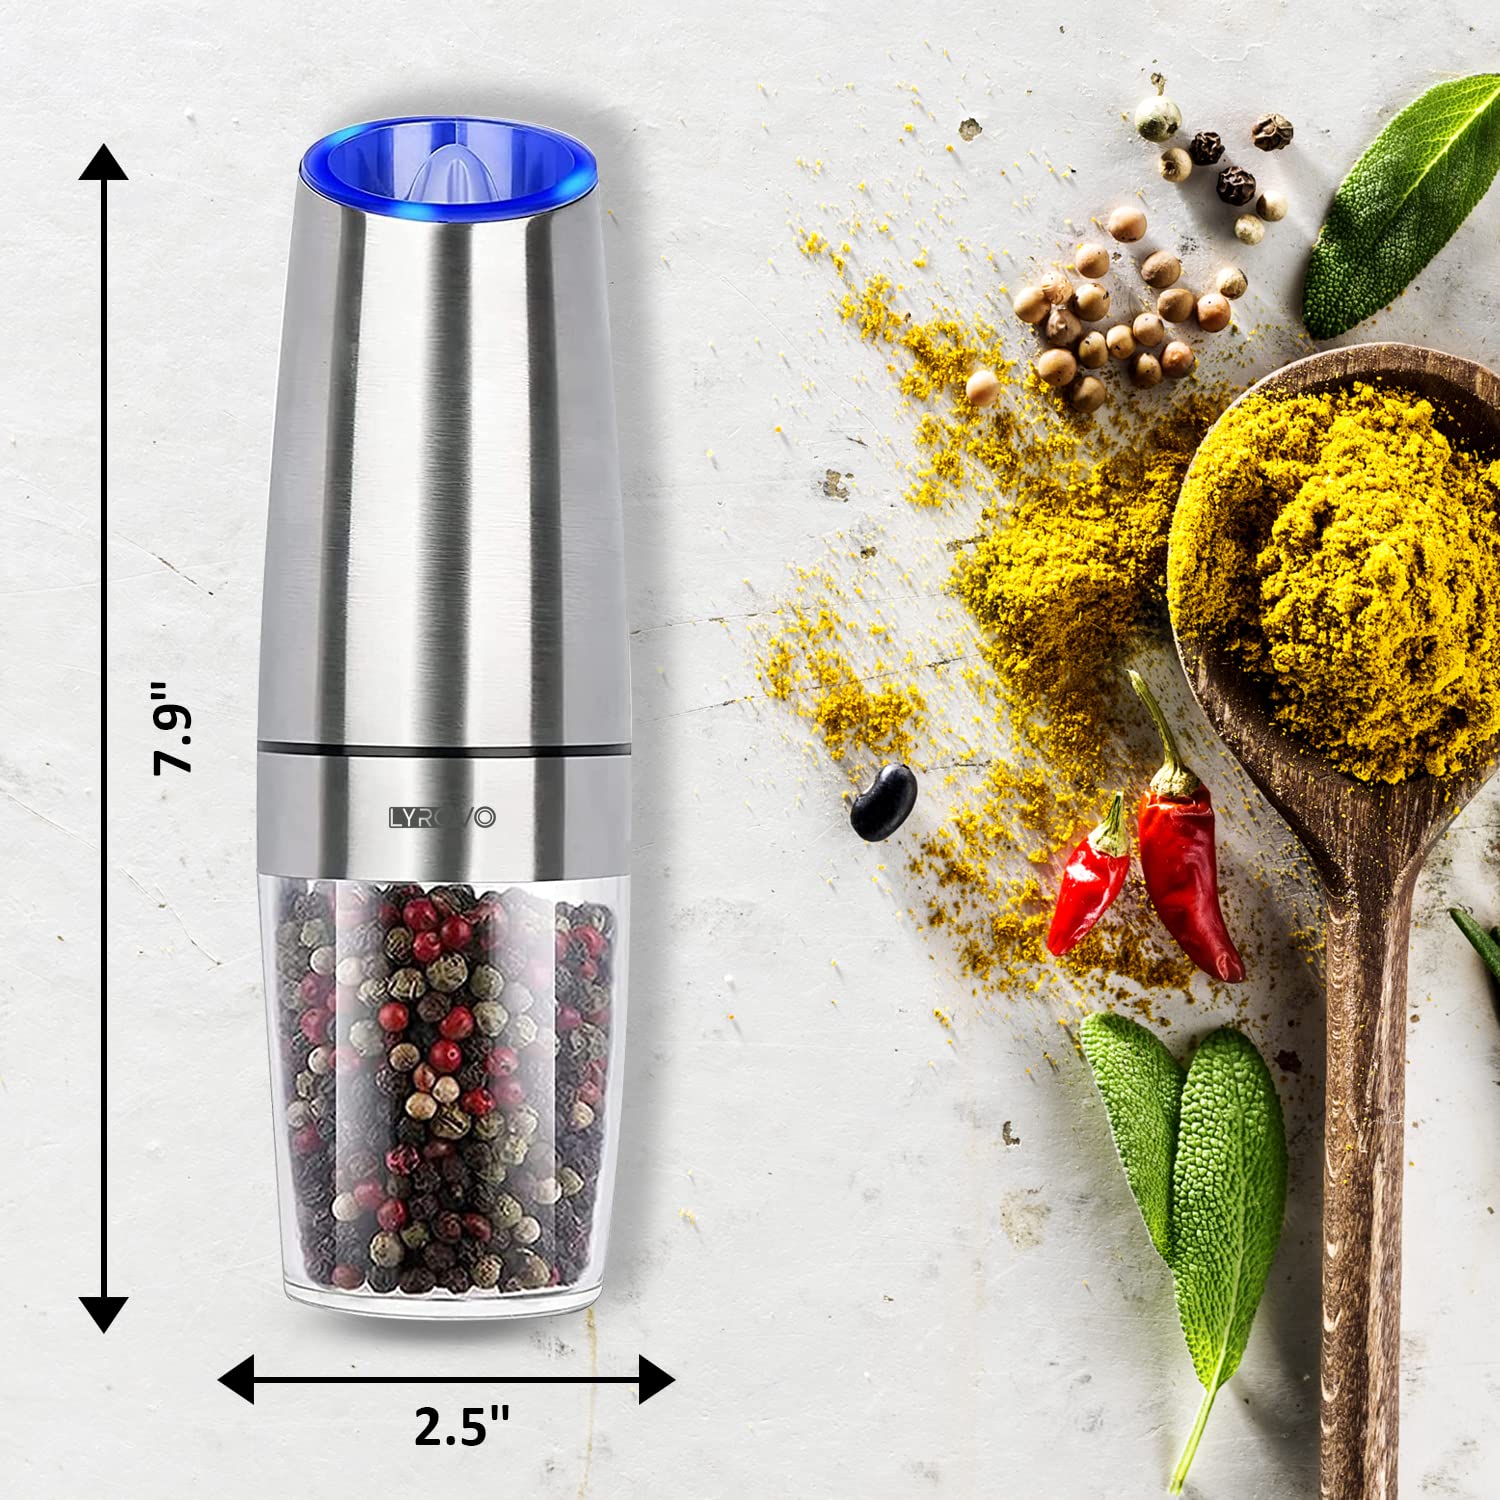 Premium Electric Gravity Style Salt And Pepper Grinder Set with Blue LED  Light by OPUX  Battery Powered Shakers, Automatic Single Hand Operation,  Adjustable Coarseness, Set of 2 Mills 